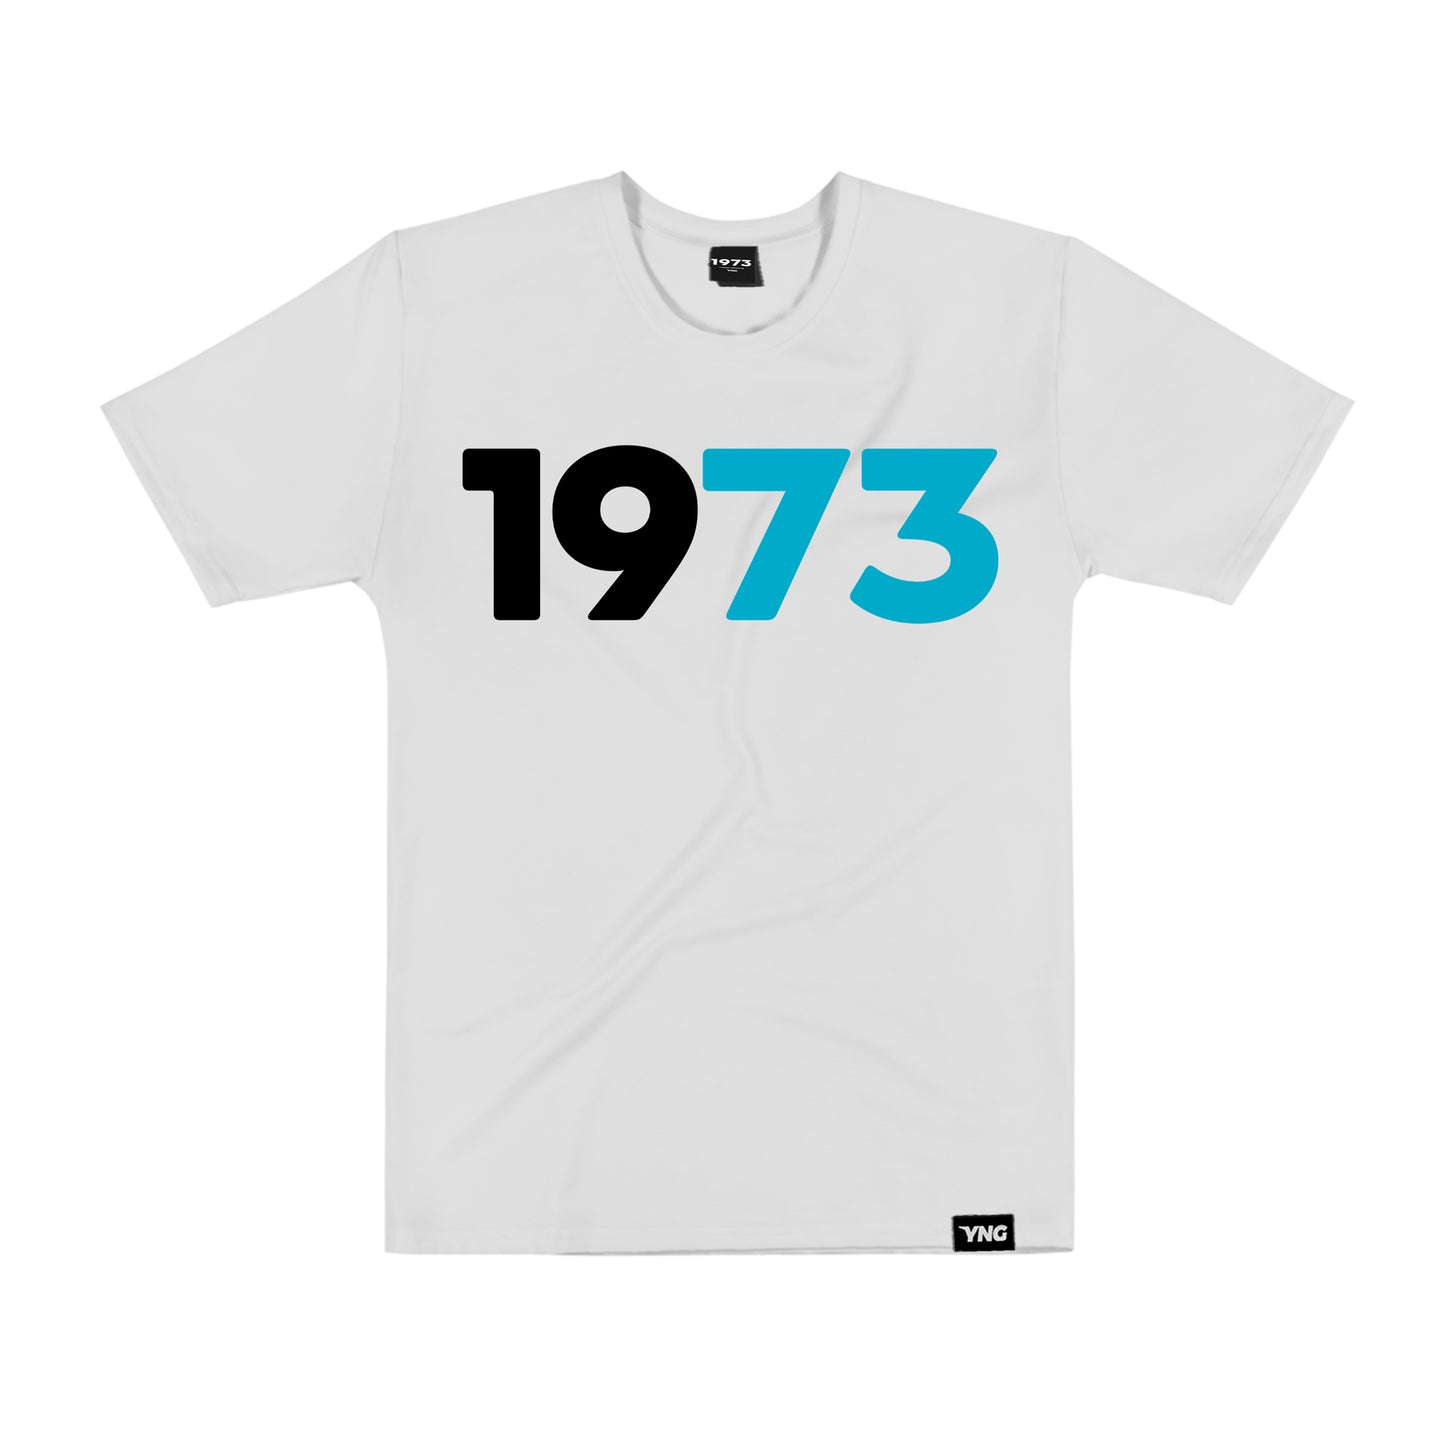 The 1973 Collection Greatness Tee - White/Aqua